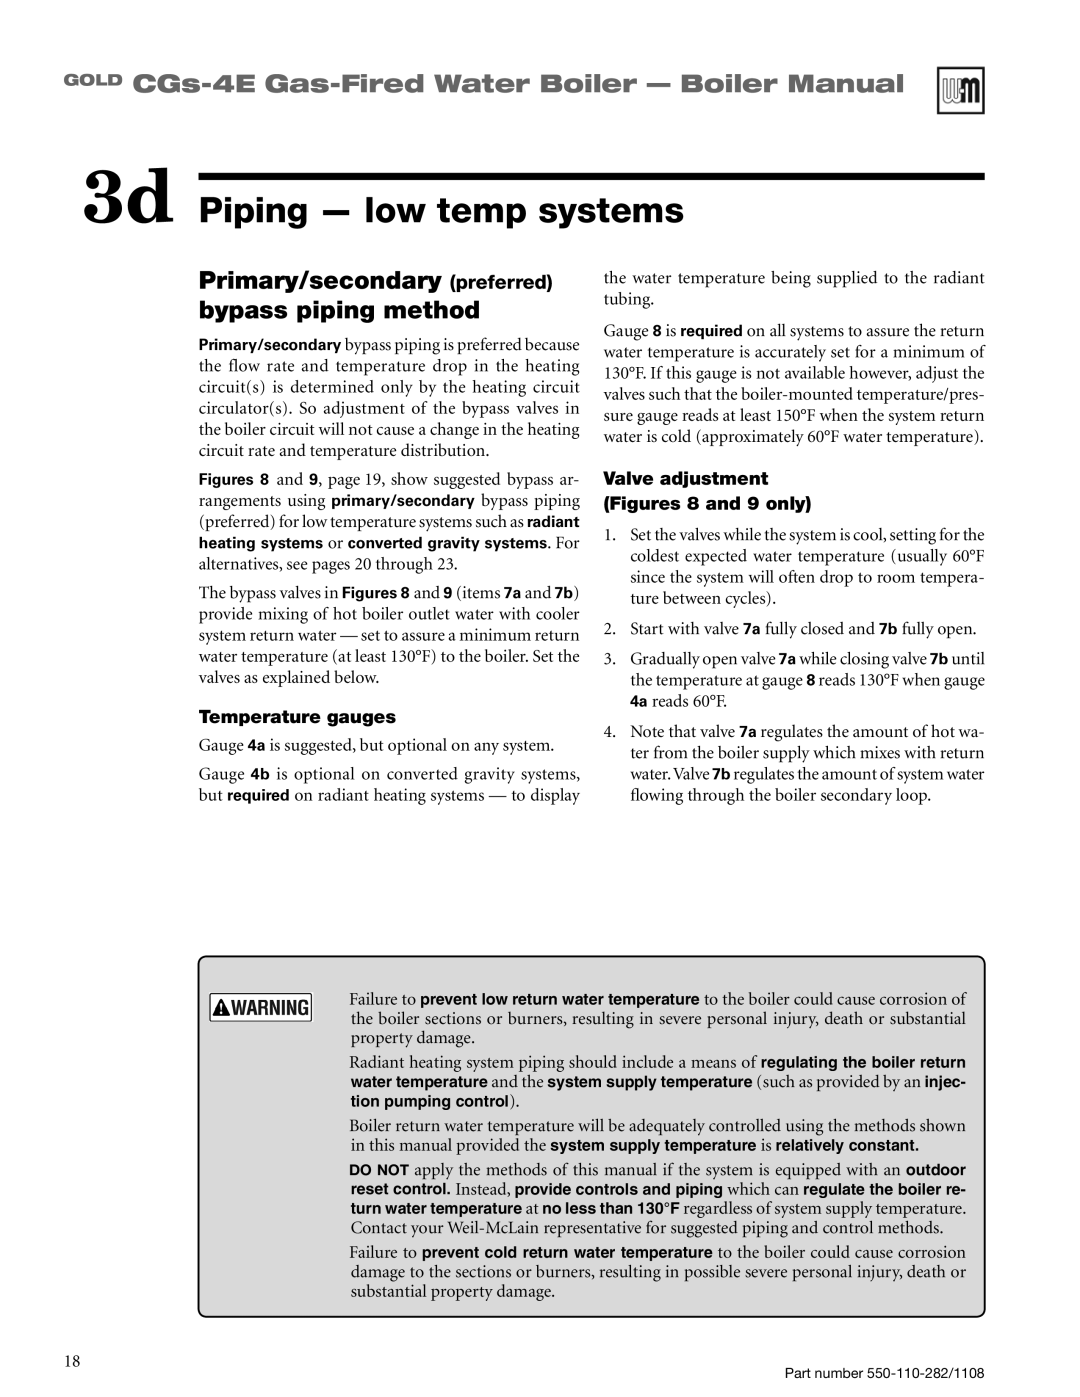 Weil-McLain CGS-4E 3d Piping - low temp systems, Primary/secondary preferred bypass piping method, Temperature gauges 